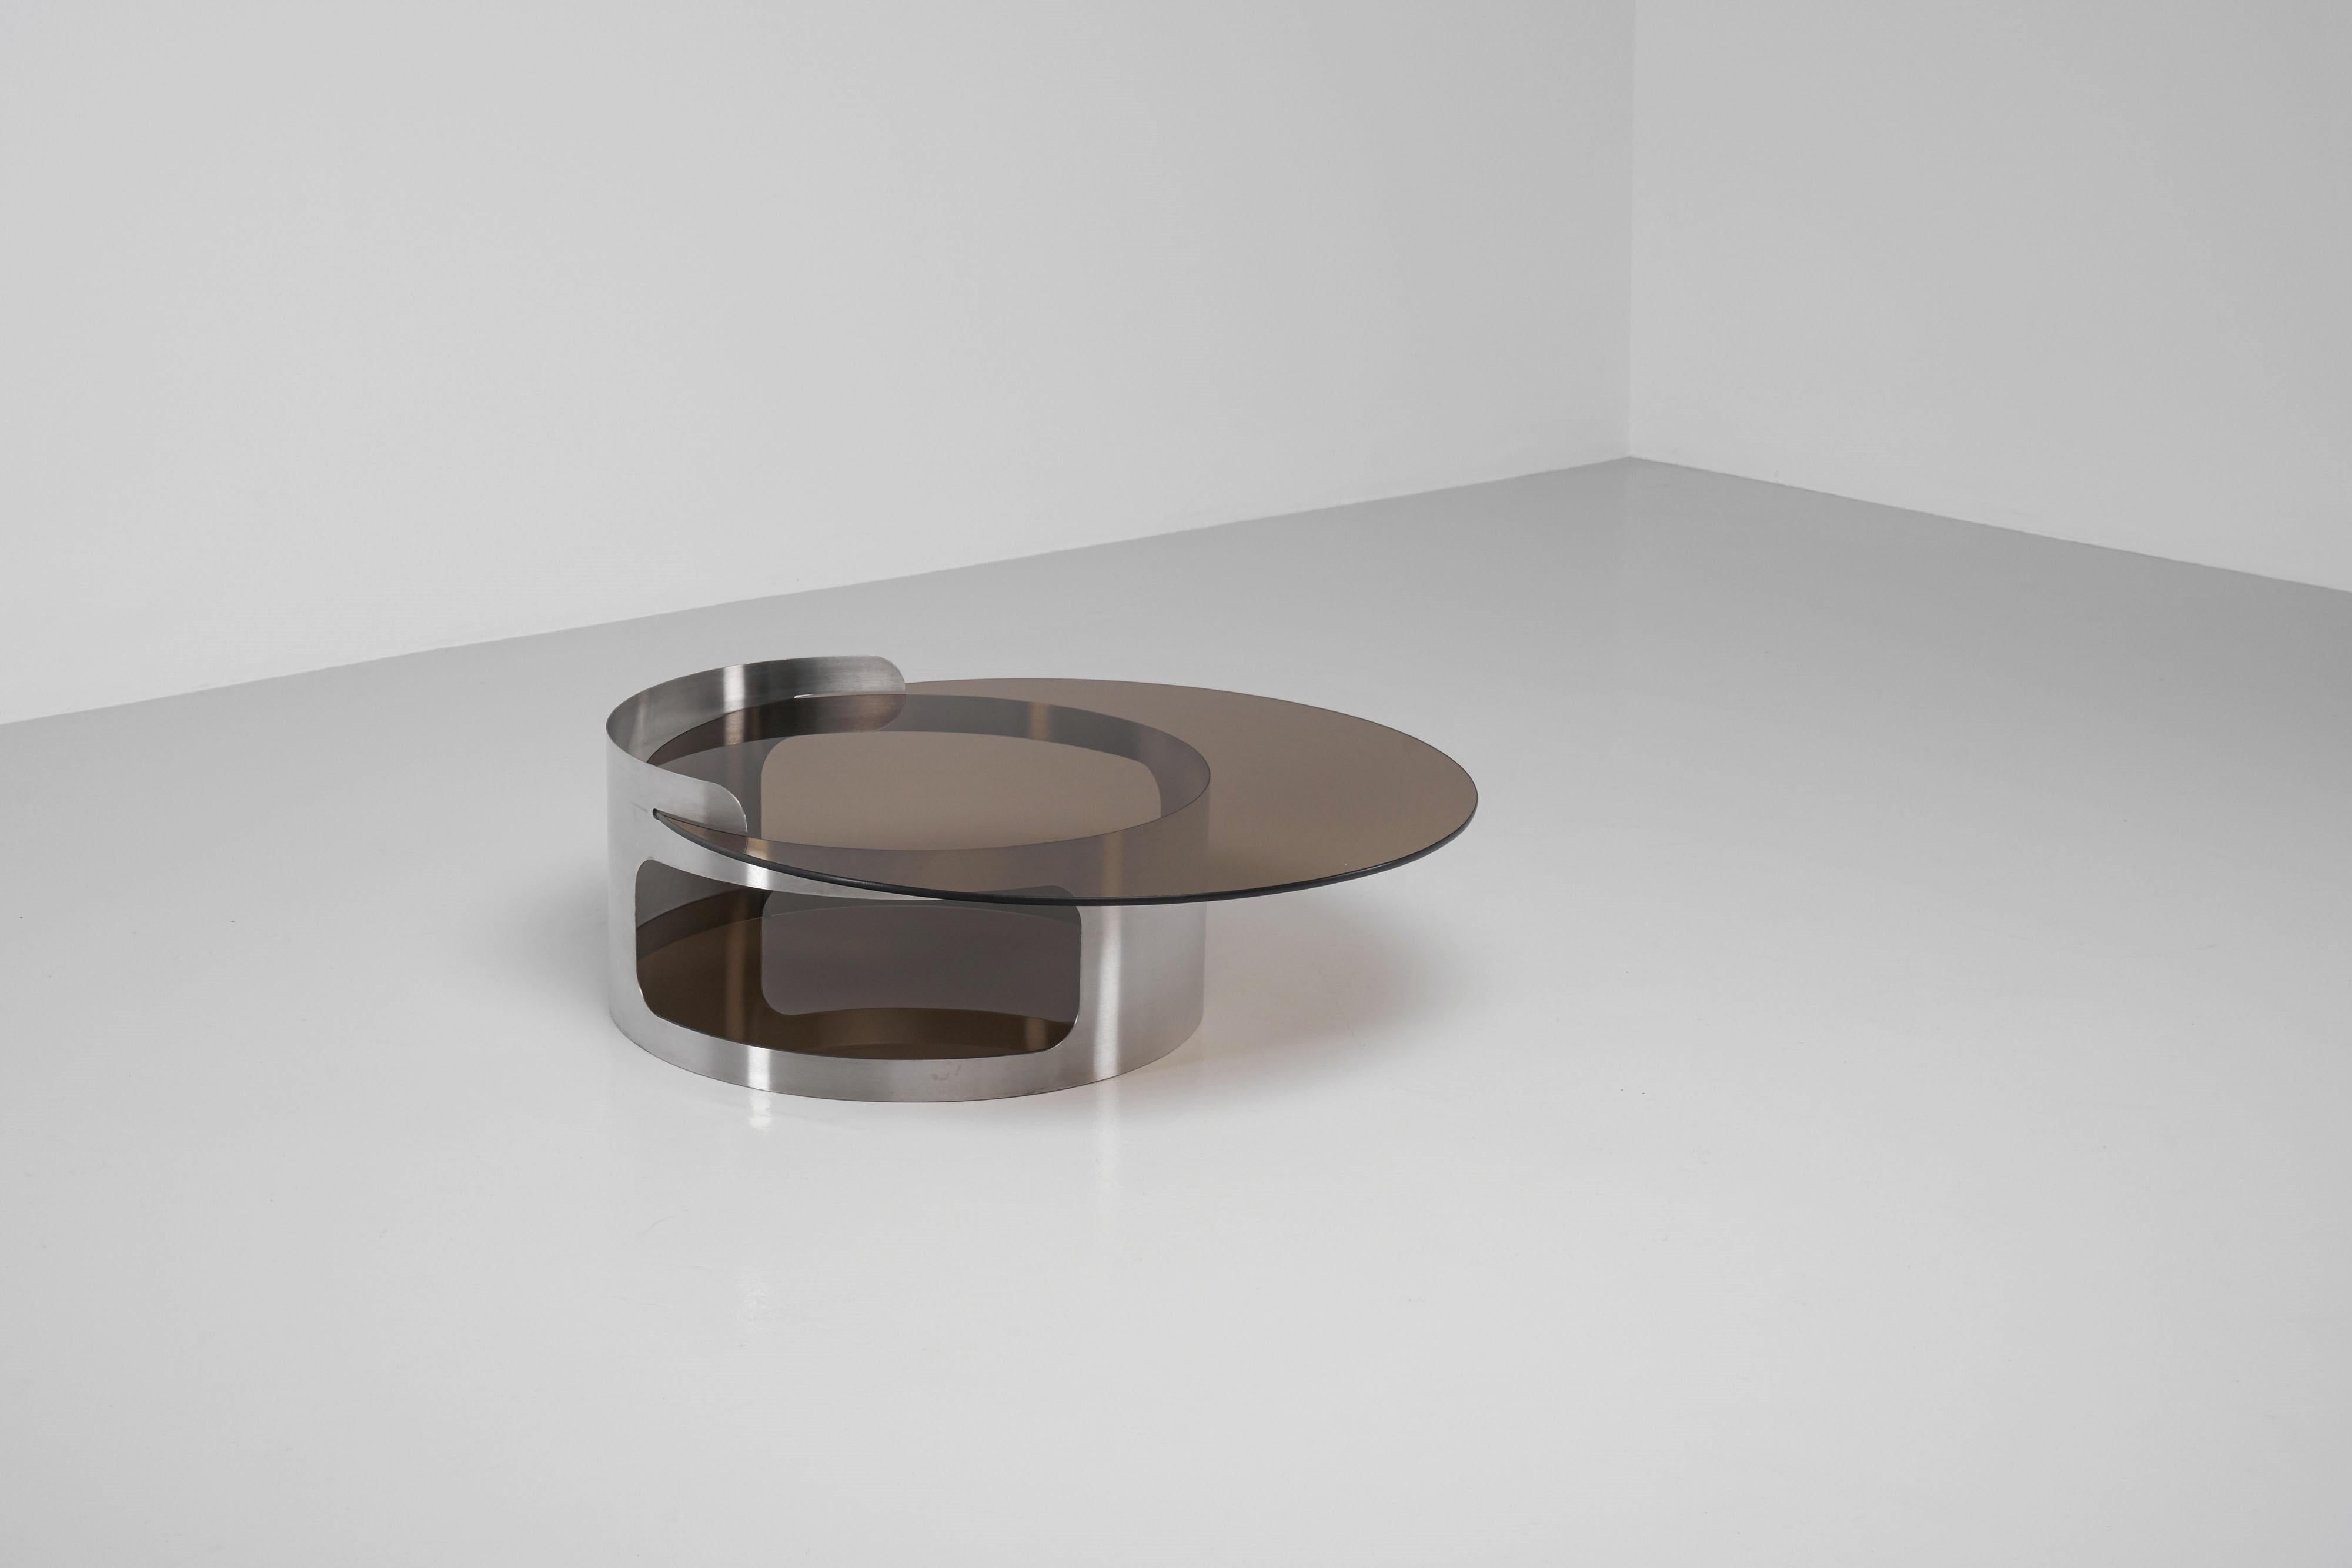 A typical seventies coffee table designed by unknown designer and manufactured by Kappa, France 1970s. This amazing asymmetrical coffee table has a stainless-steel ring-shaped structure and is finished with smoked glass tops. These materials were